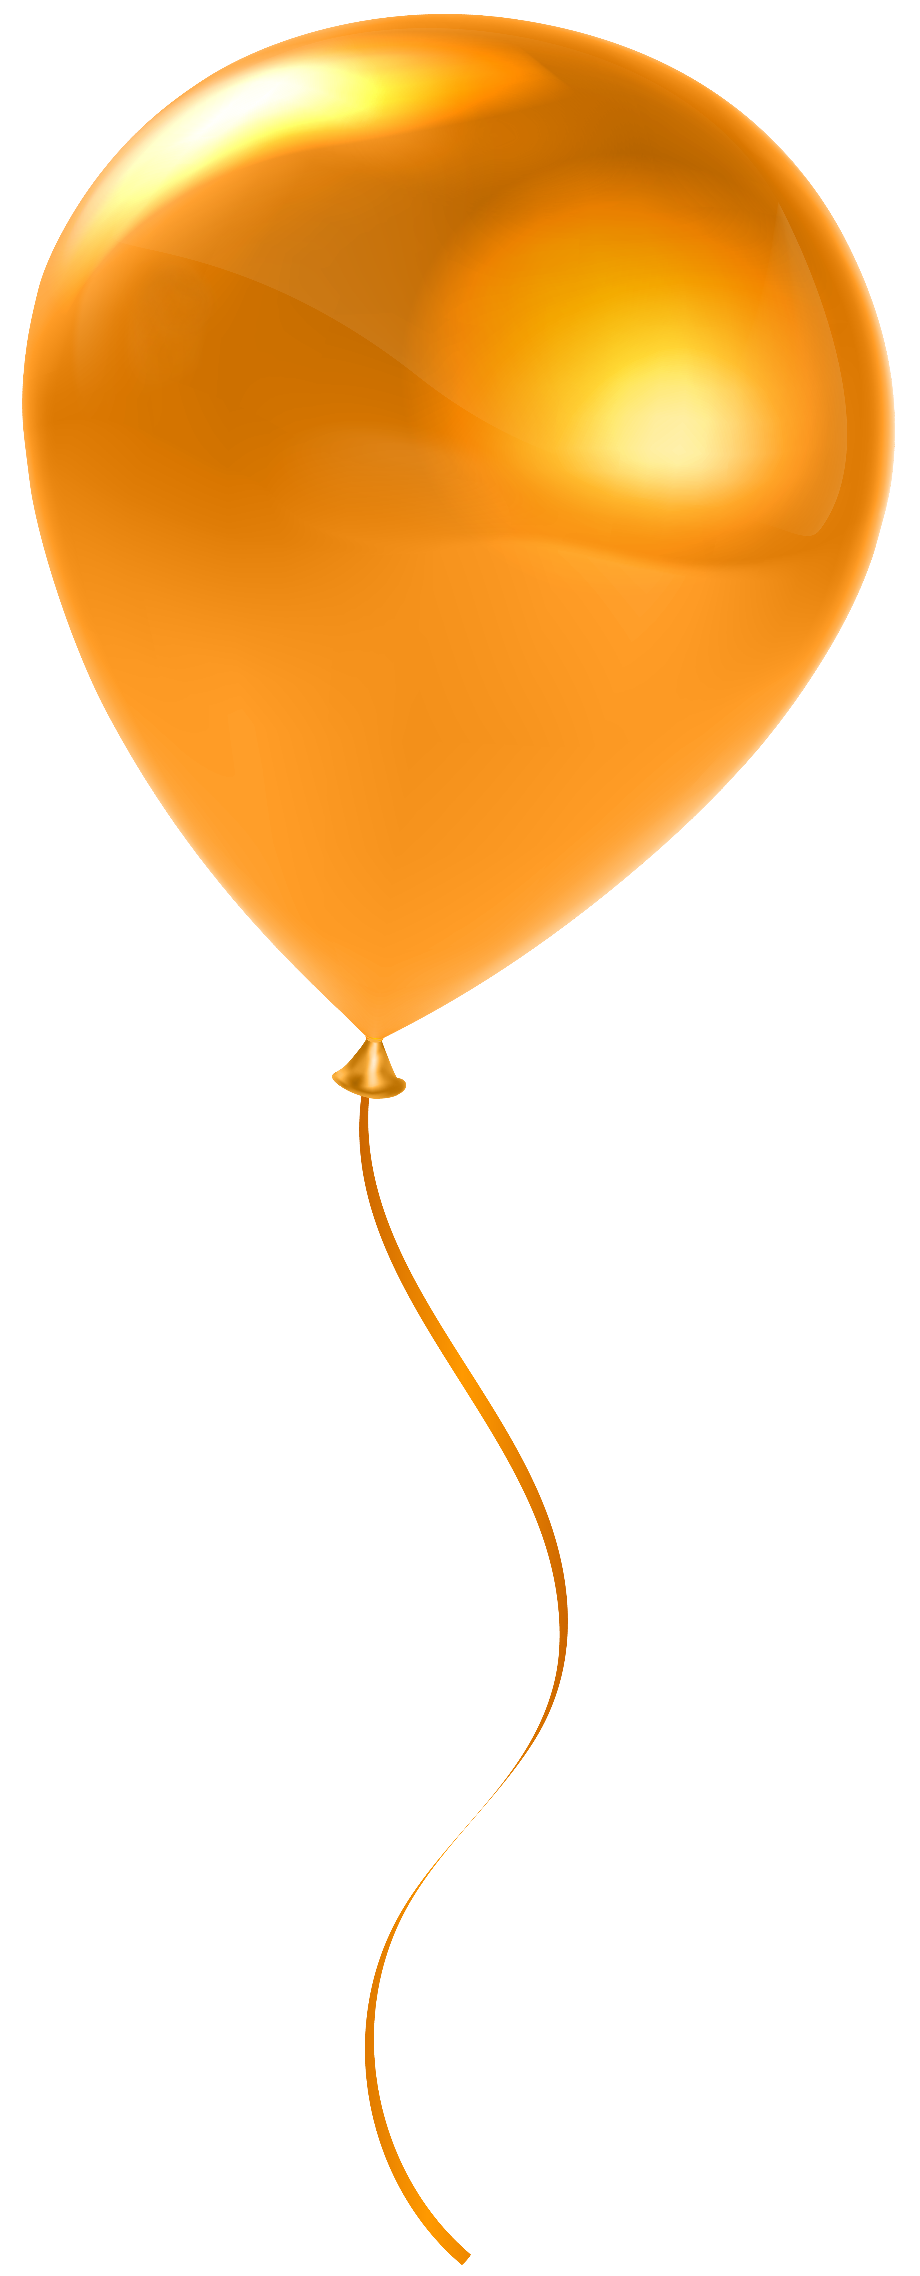 Download High Quality balloon clipart orange Transparent PNG Images